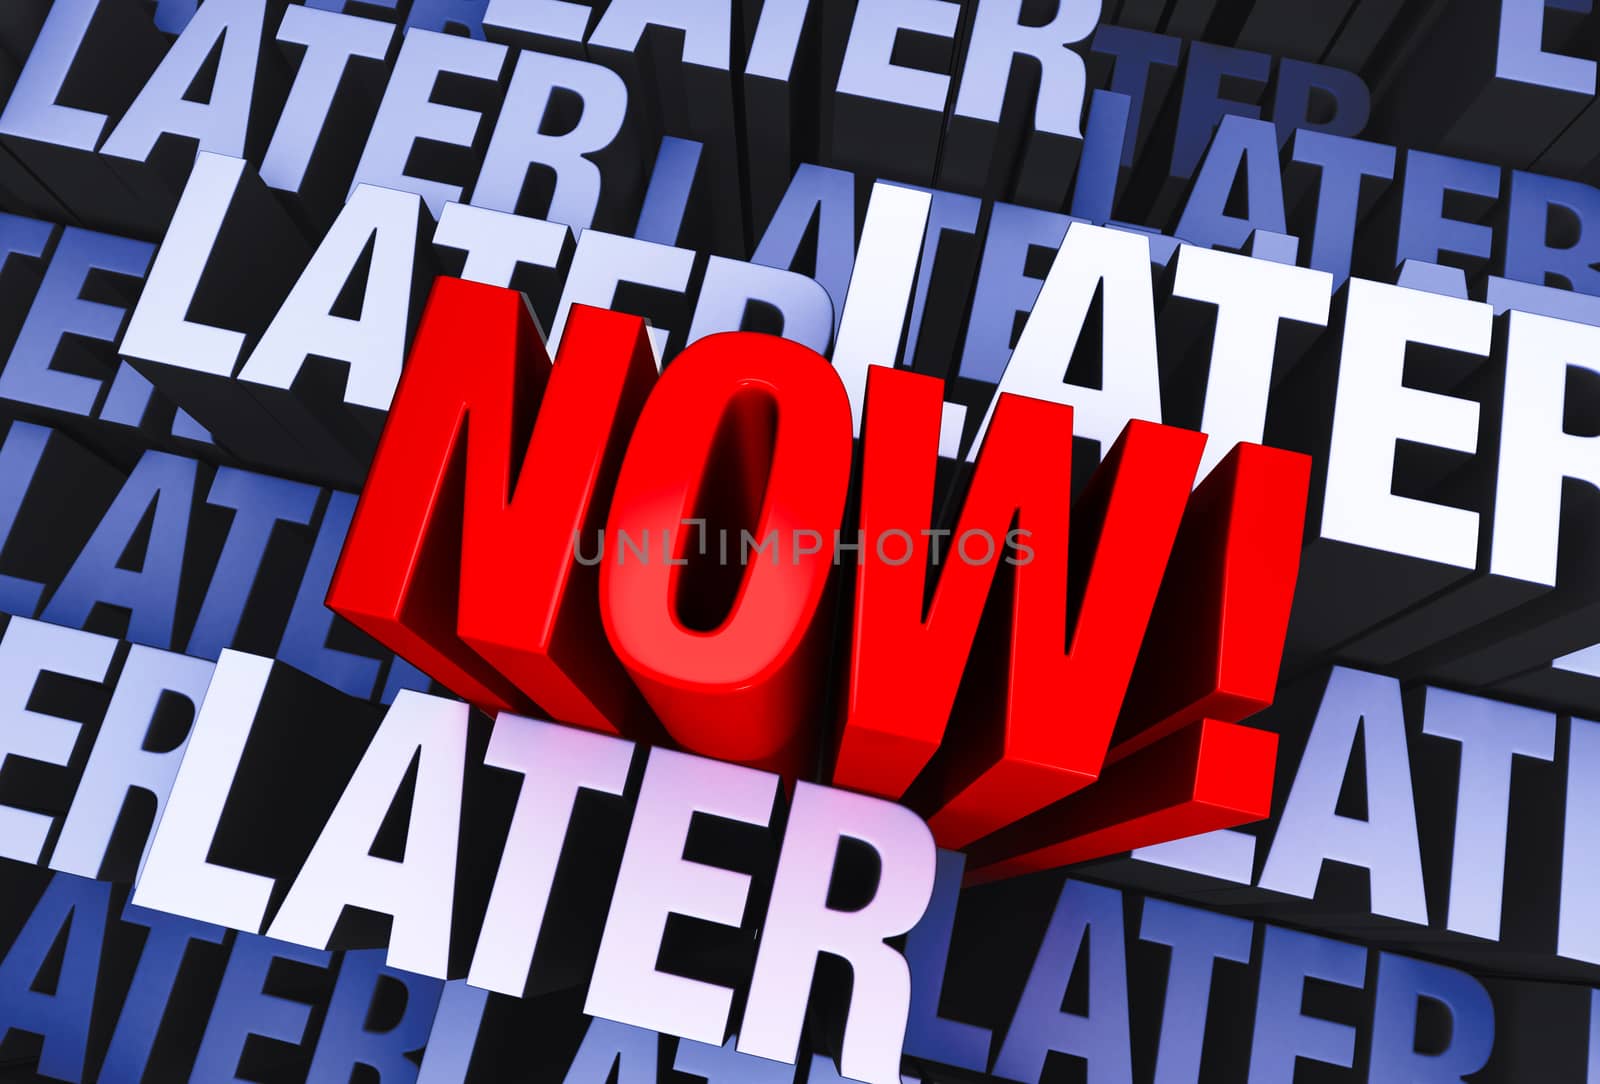 A bold, red "NOW!" emerges from a multi-level background made up of multiple instances of the word "LATER" 